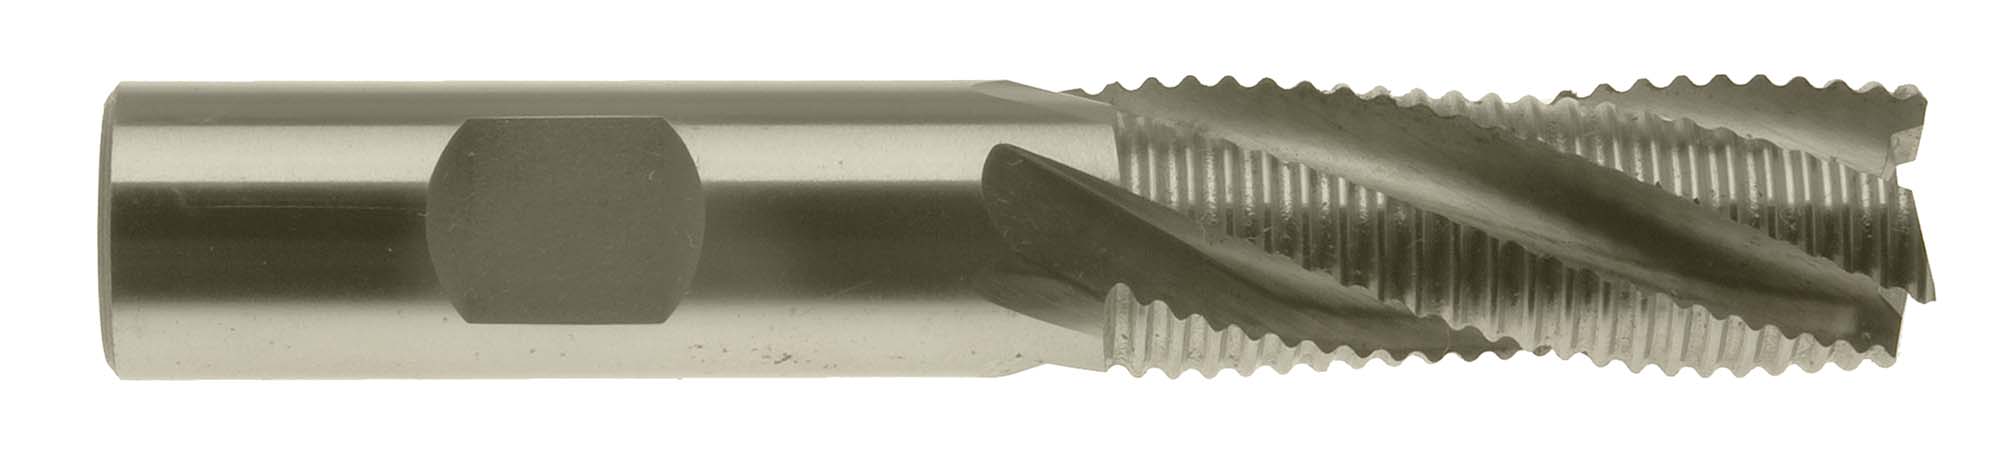 EM-CR368 - 1-3/4" Coarse Tooth M42 Cobalt Roughing End Mill-1-1/4" Shank